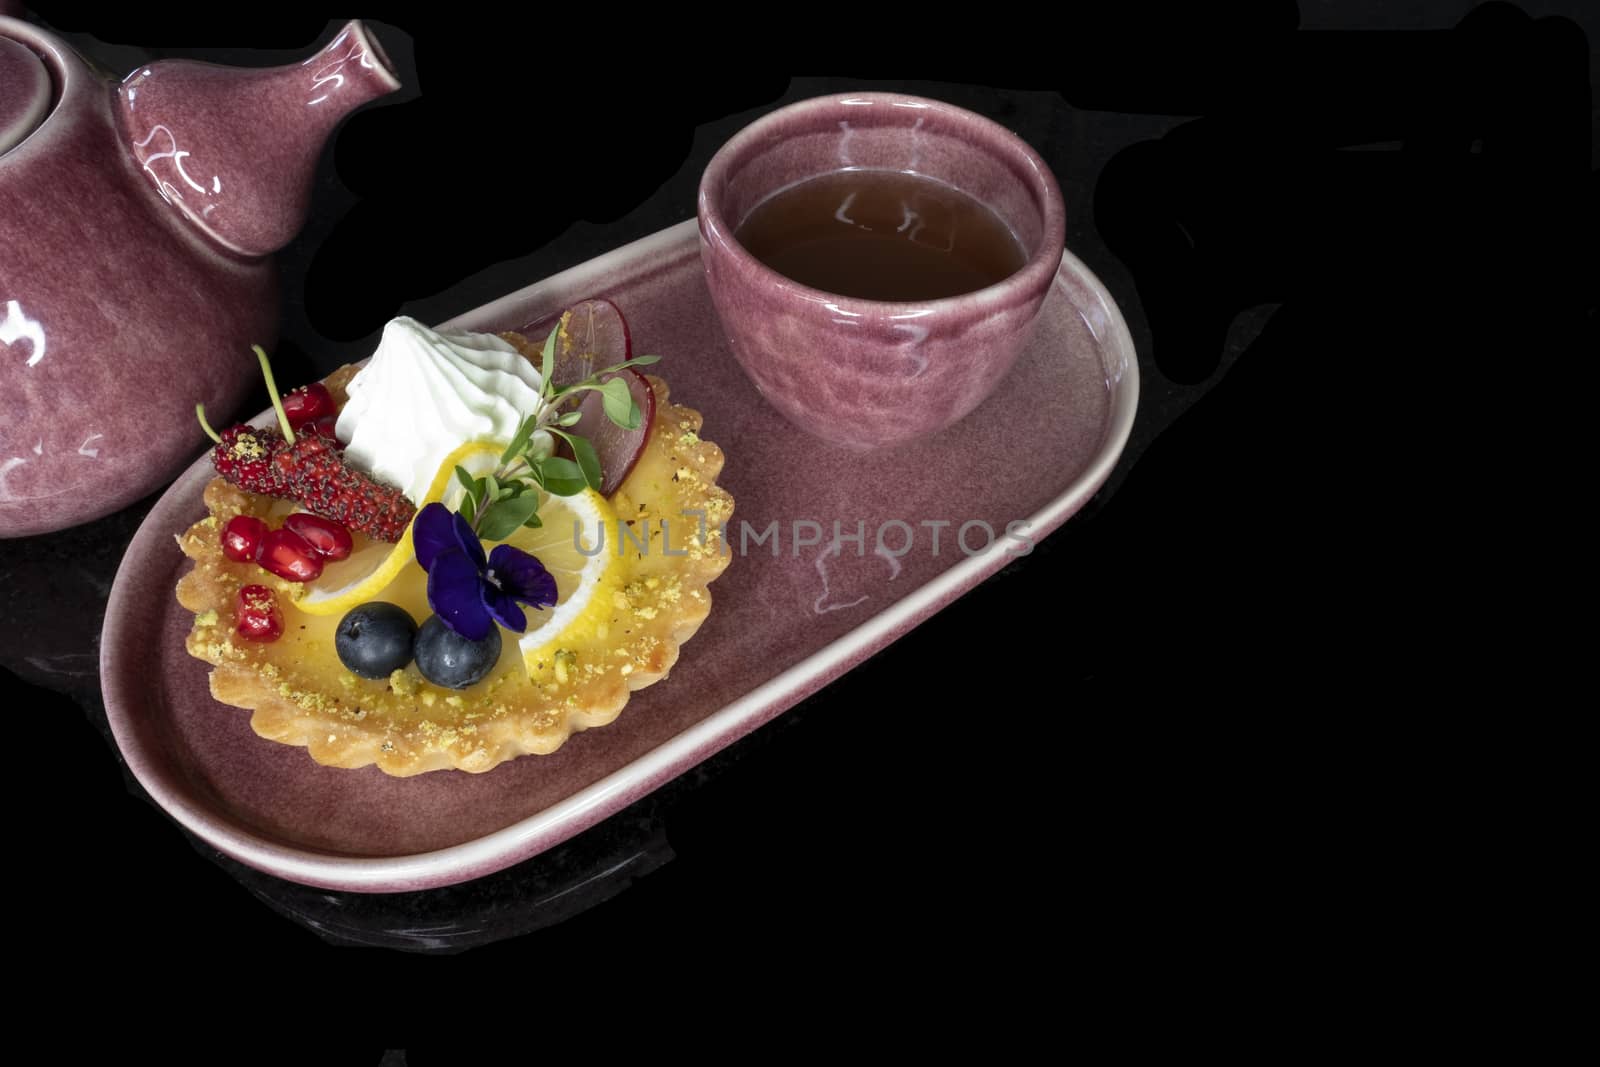 A piece of mixed fruit lemon tart on a purple ceramic plate with a tea cup and a chinese style ceramic tea pot. Black background.